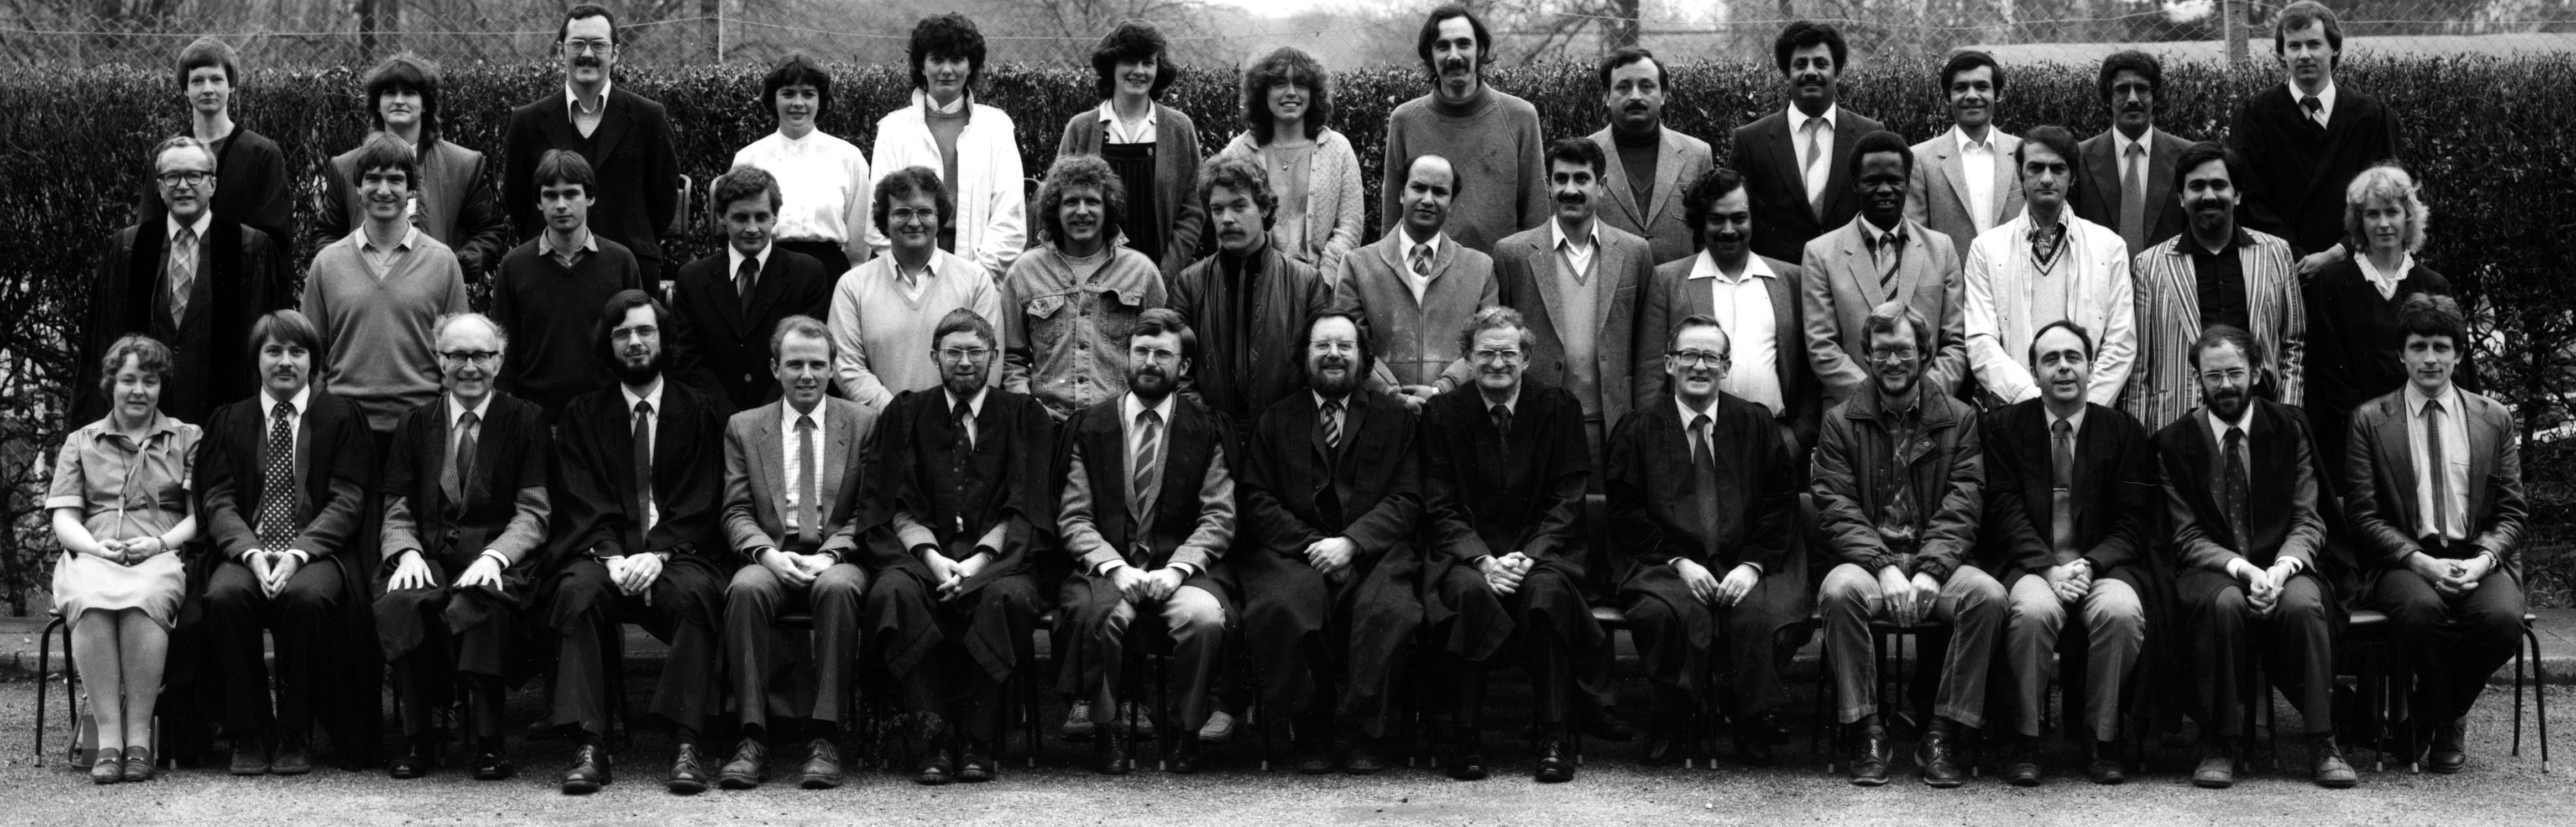 Geography Department Postgraduate Group Photo from 1983